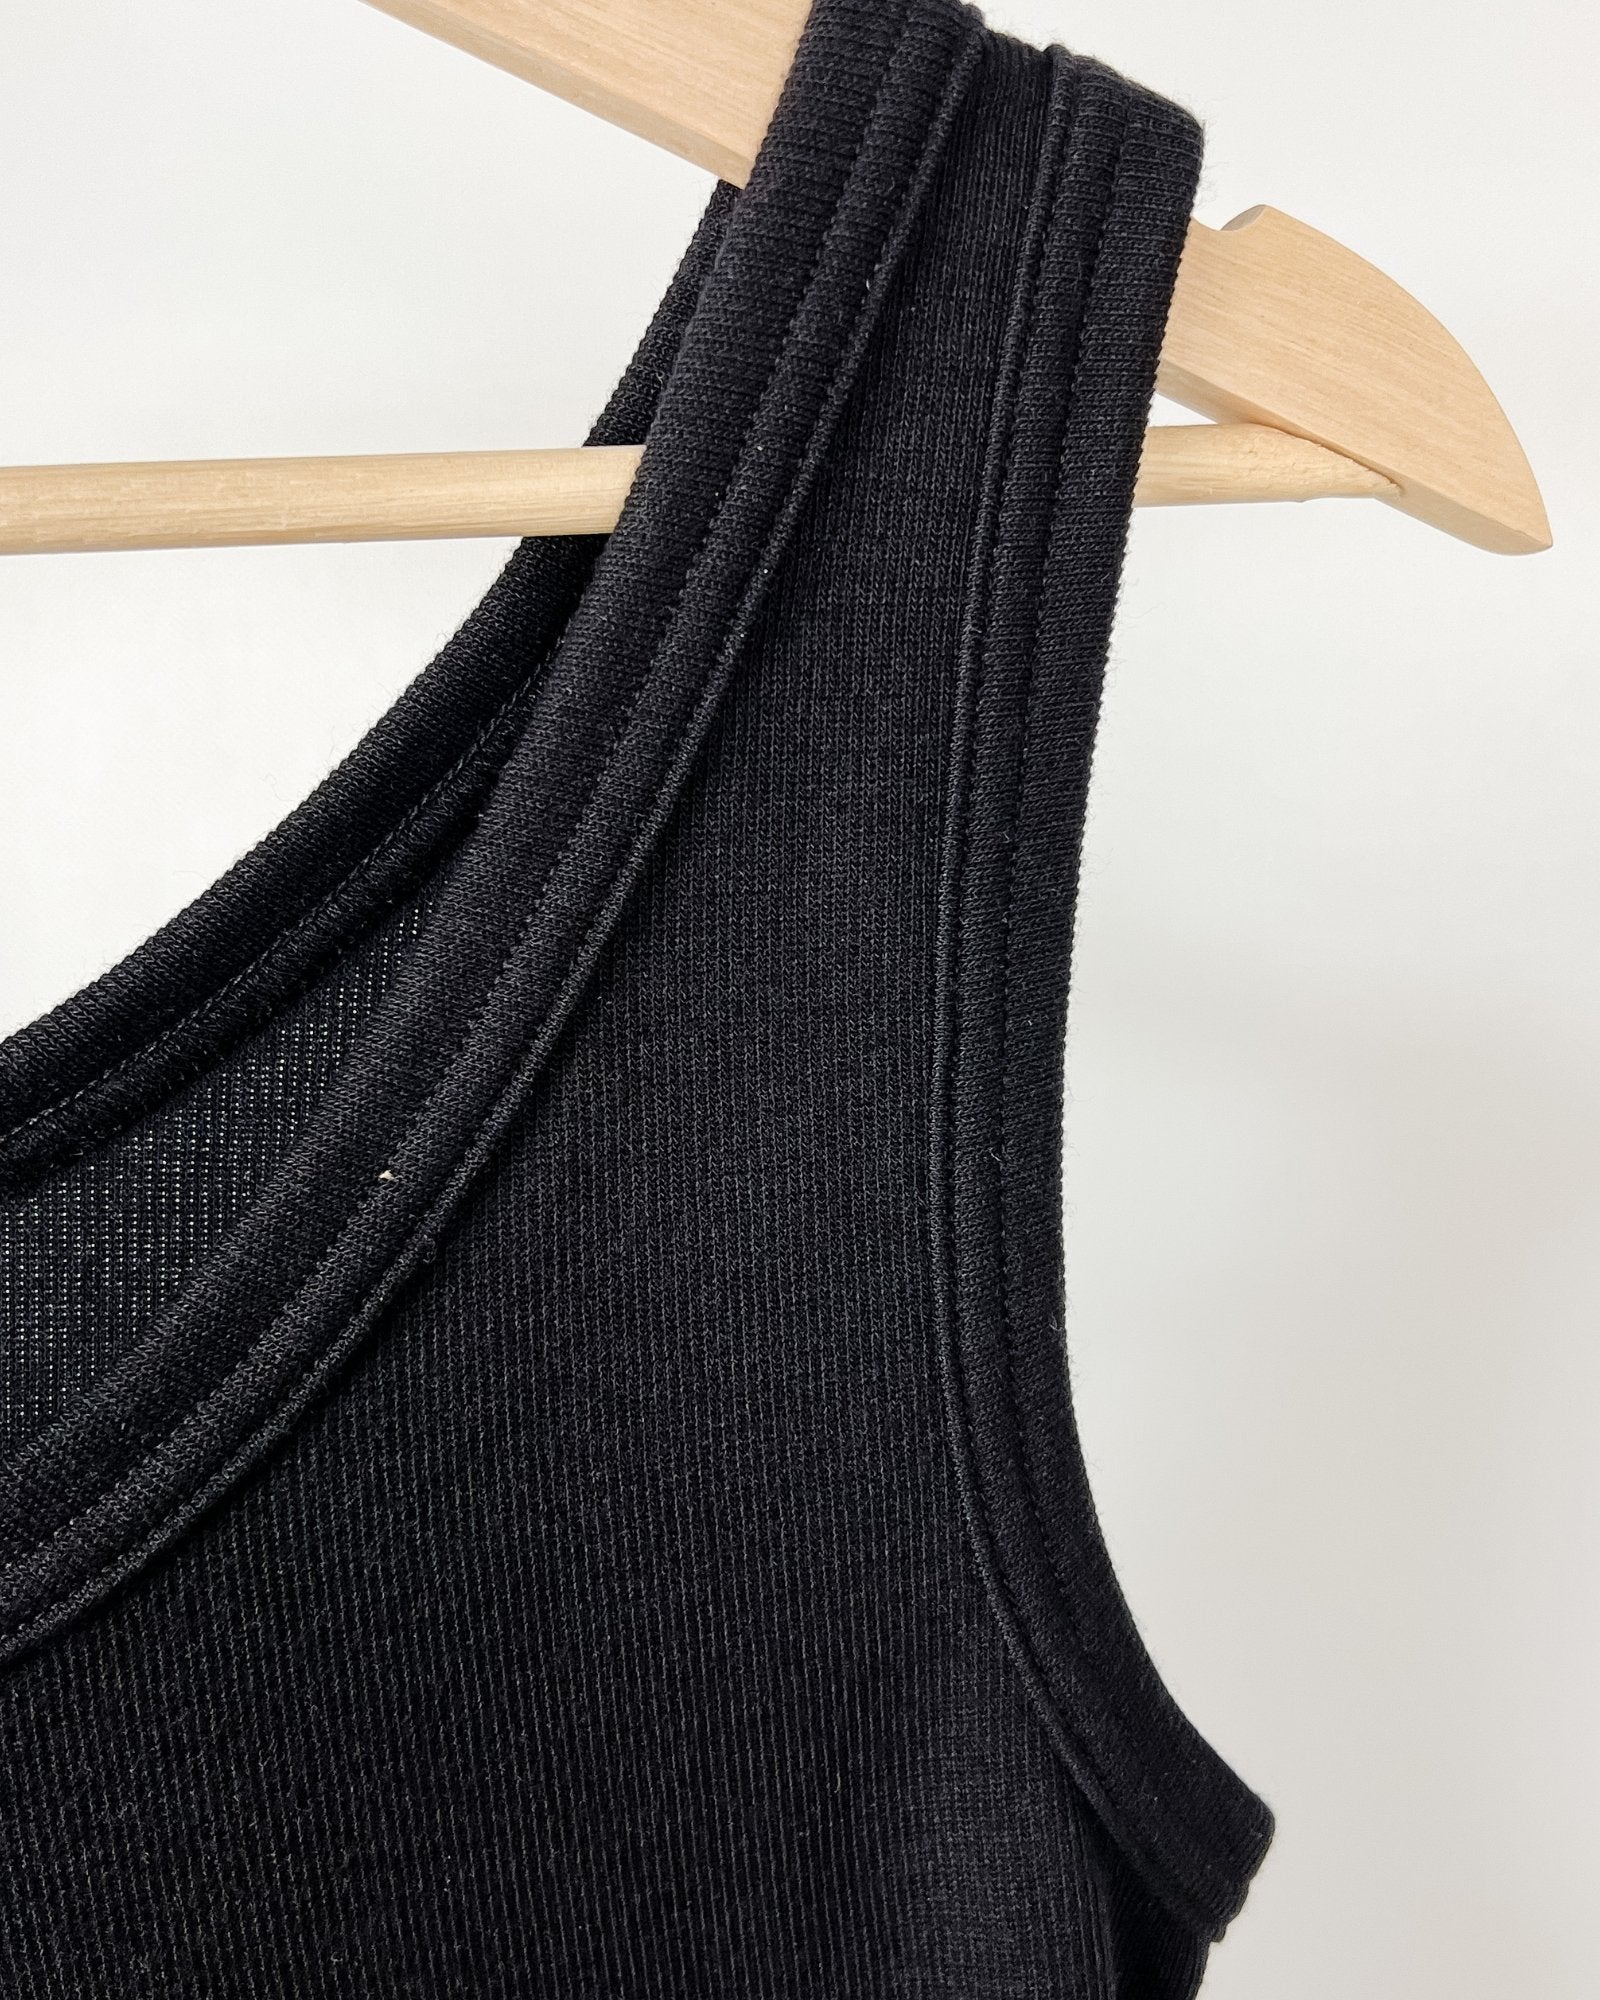 Devon Compression Cami Top from Girlfriend Collective. Discover  ethically-made, sustainable fashion at OAT & OCHRE. Our slow fashion  collections features organic cotton and timeless designs. Shop now for  classic, minimal styles.